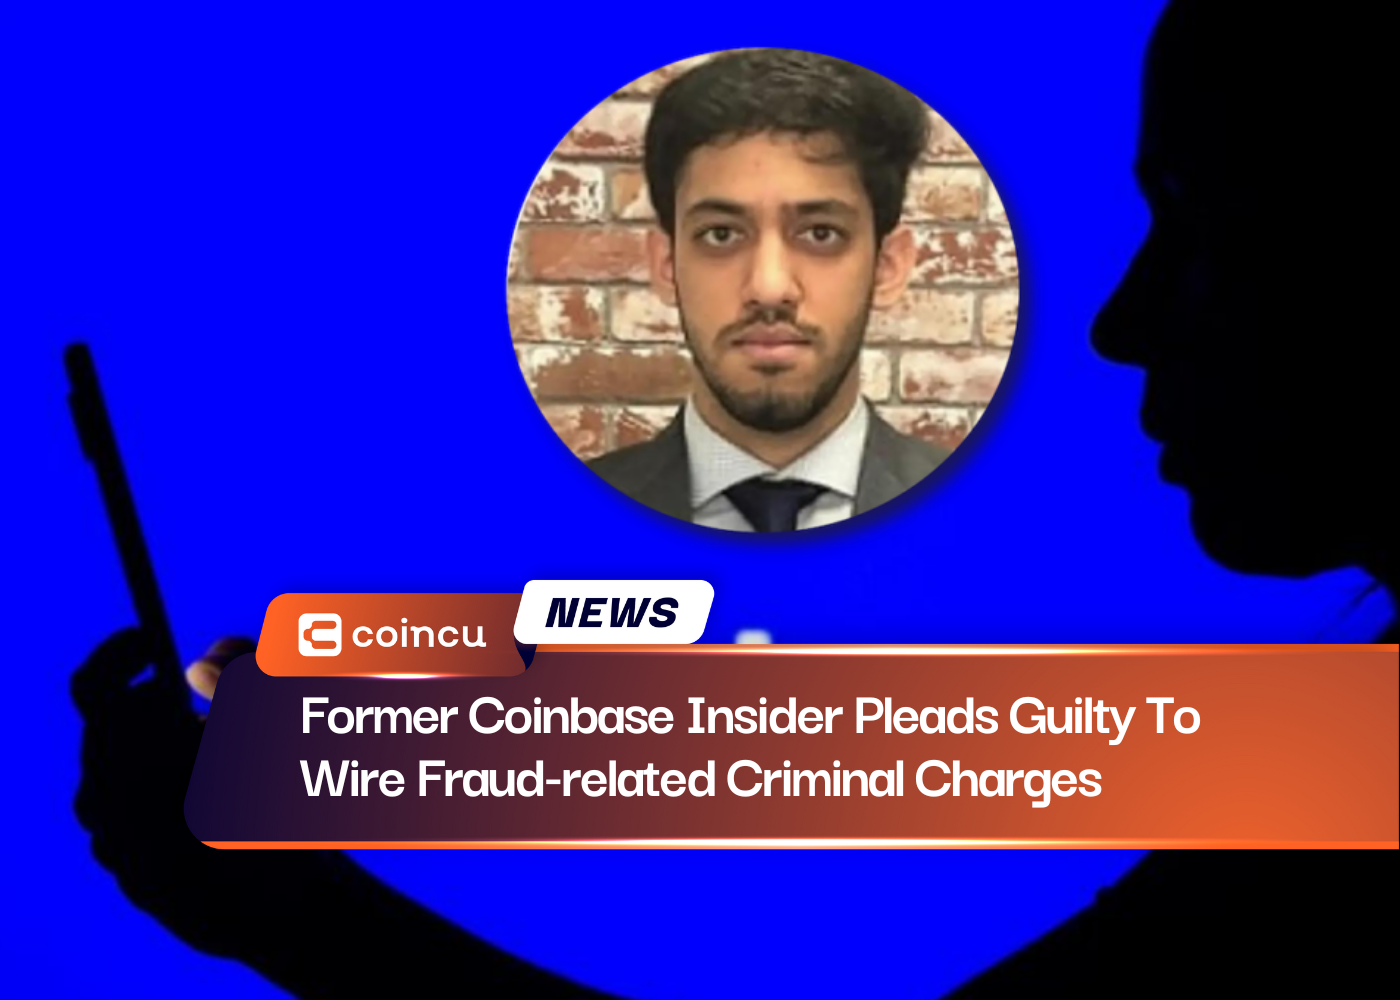 Former Coinbase Insider Pleads Guilty To Wire Fraud-related Criminal Charges